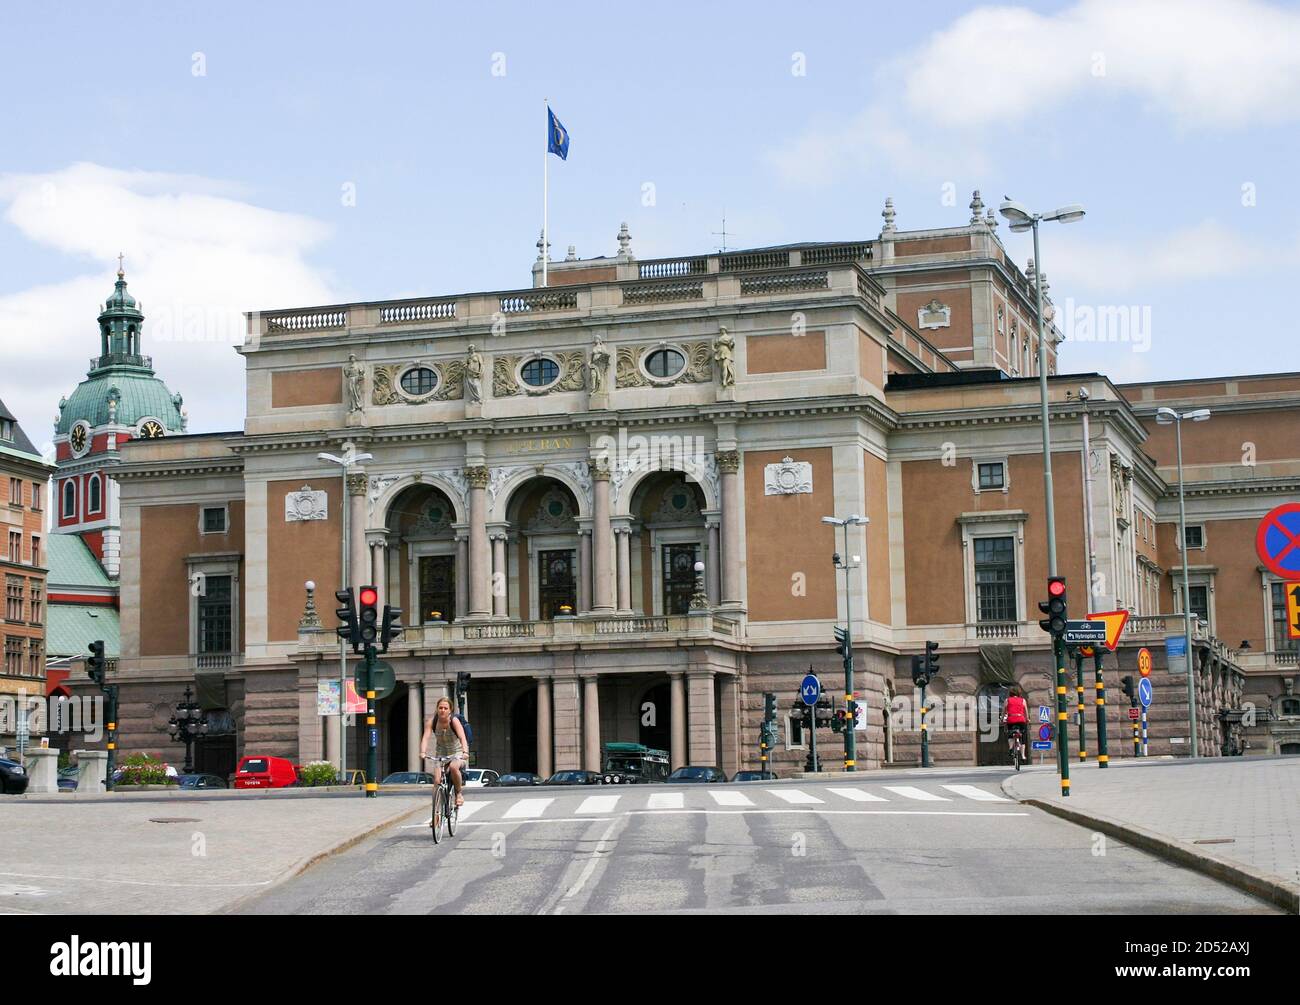 STOCKHOLM OPERA HOUSE at Gustav Adolfs torg across the square from the ministry of foreign affaires Stock Photo